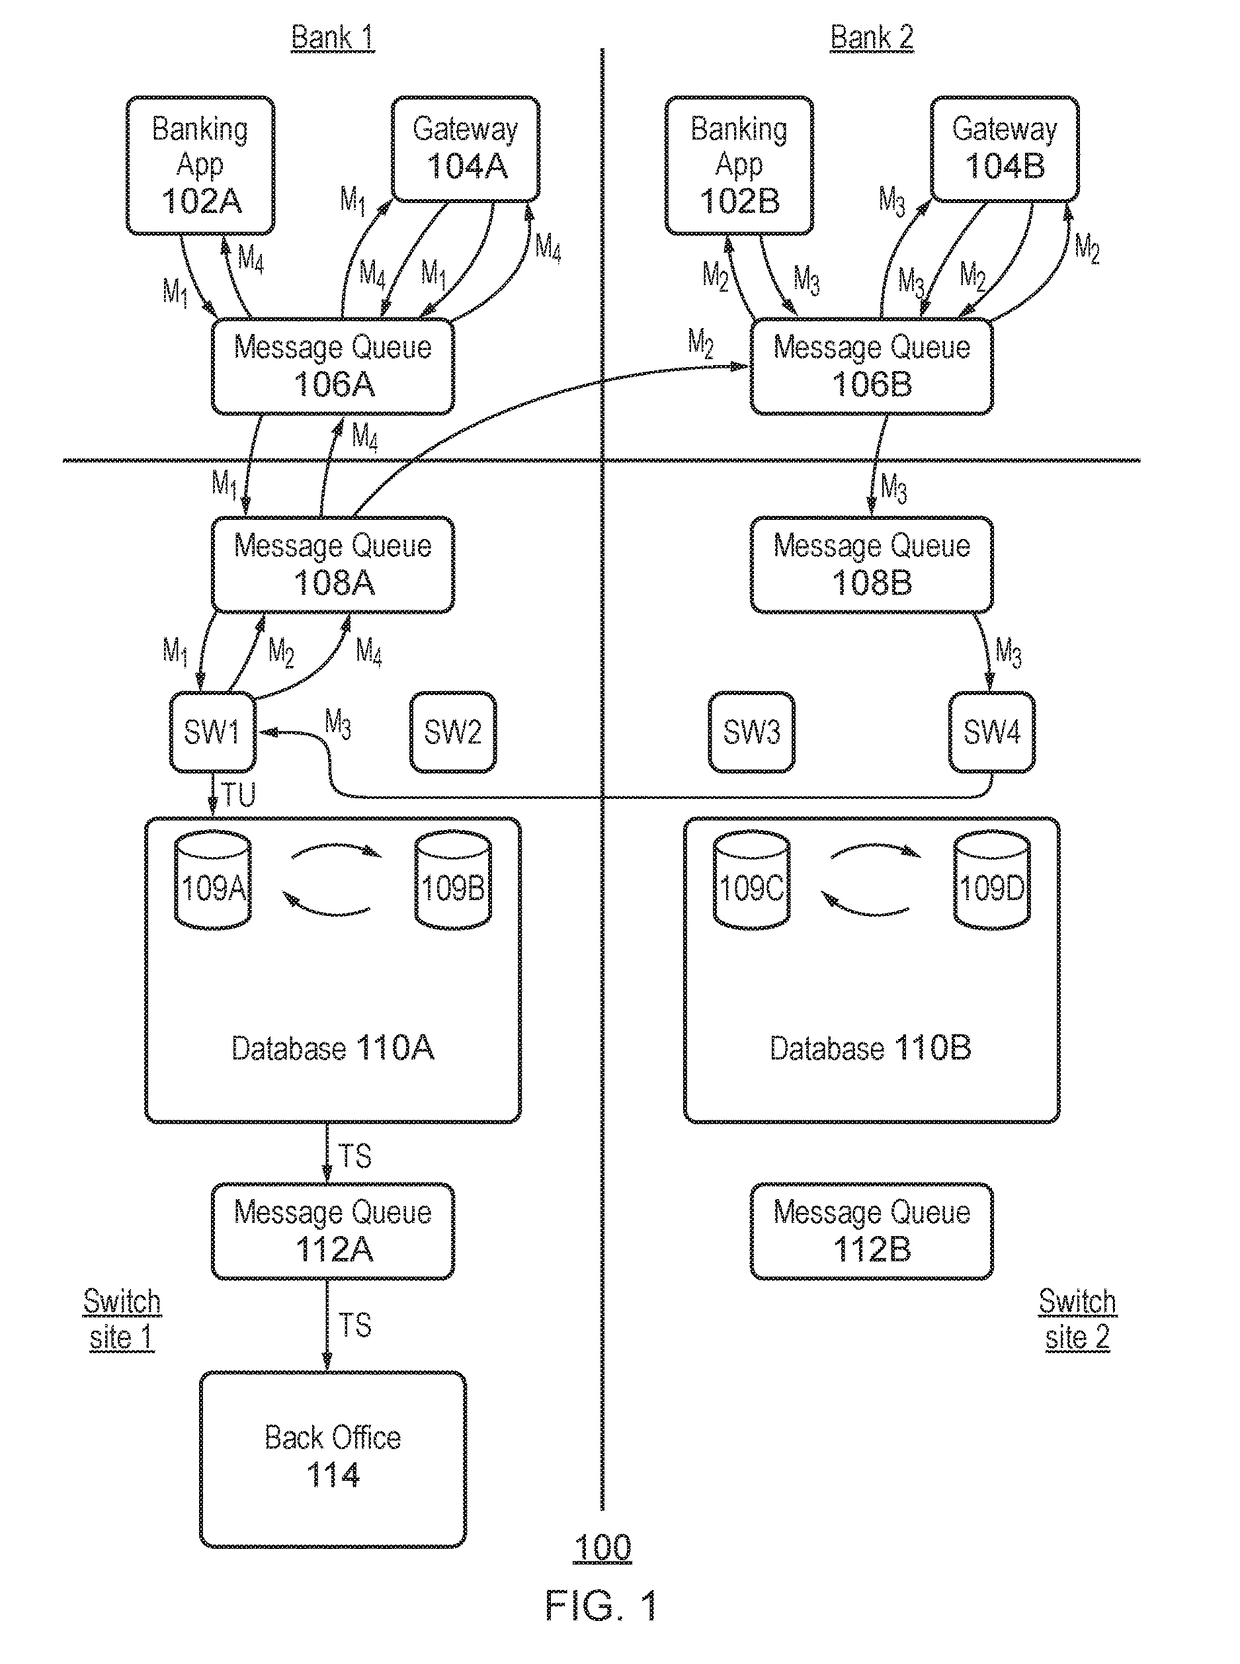 System server for receiving transaction requests